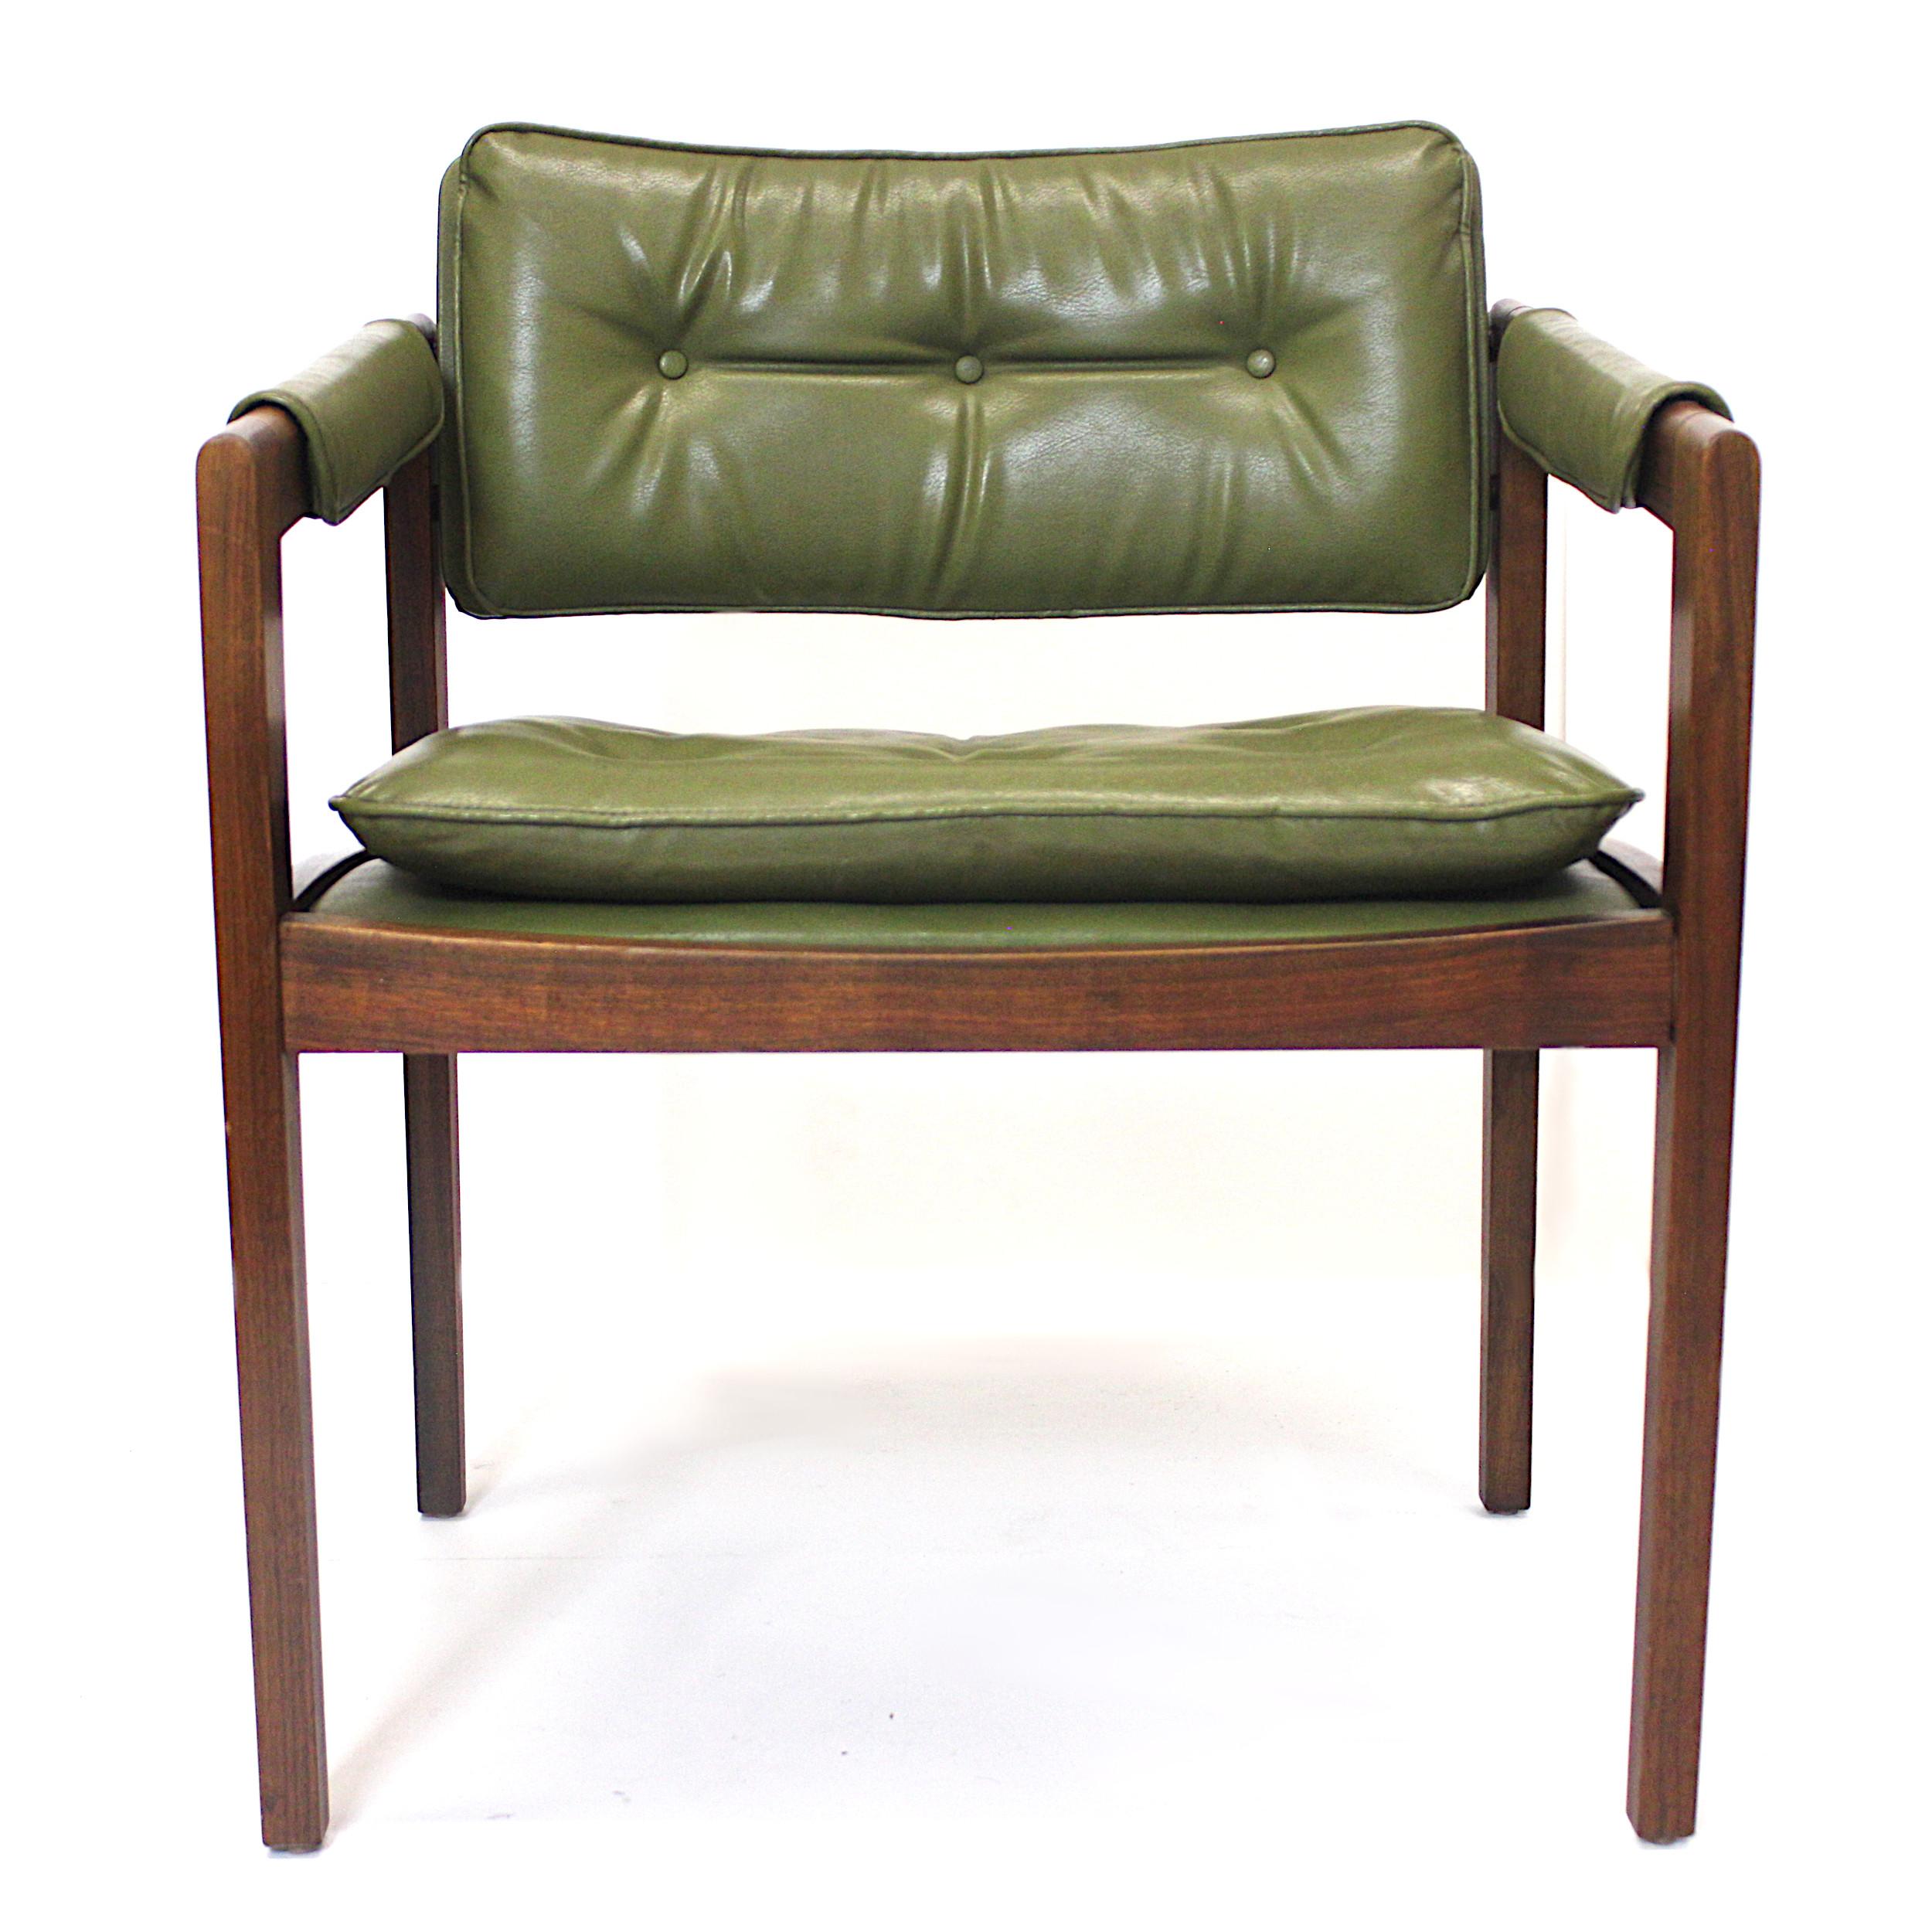 Unusual Pair of Green Mid-Century Modern Lounge Chairs by Glenn of California 2